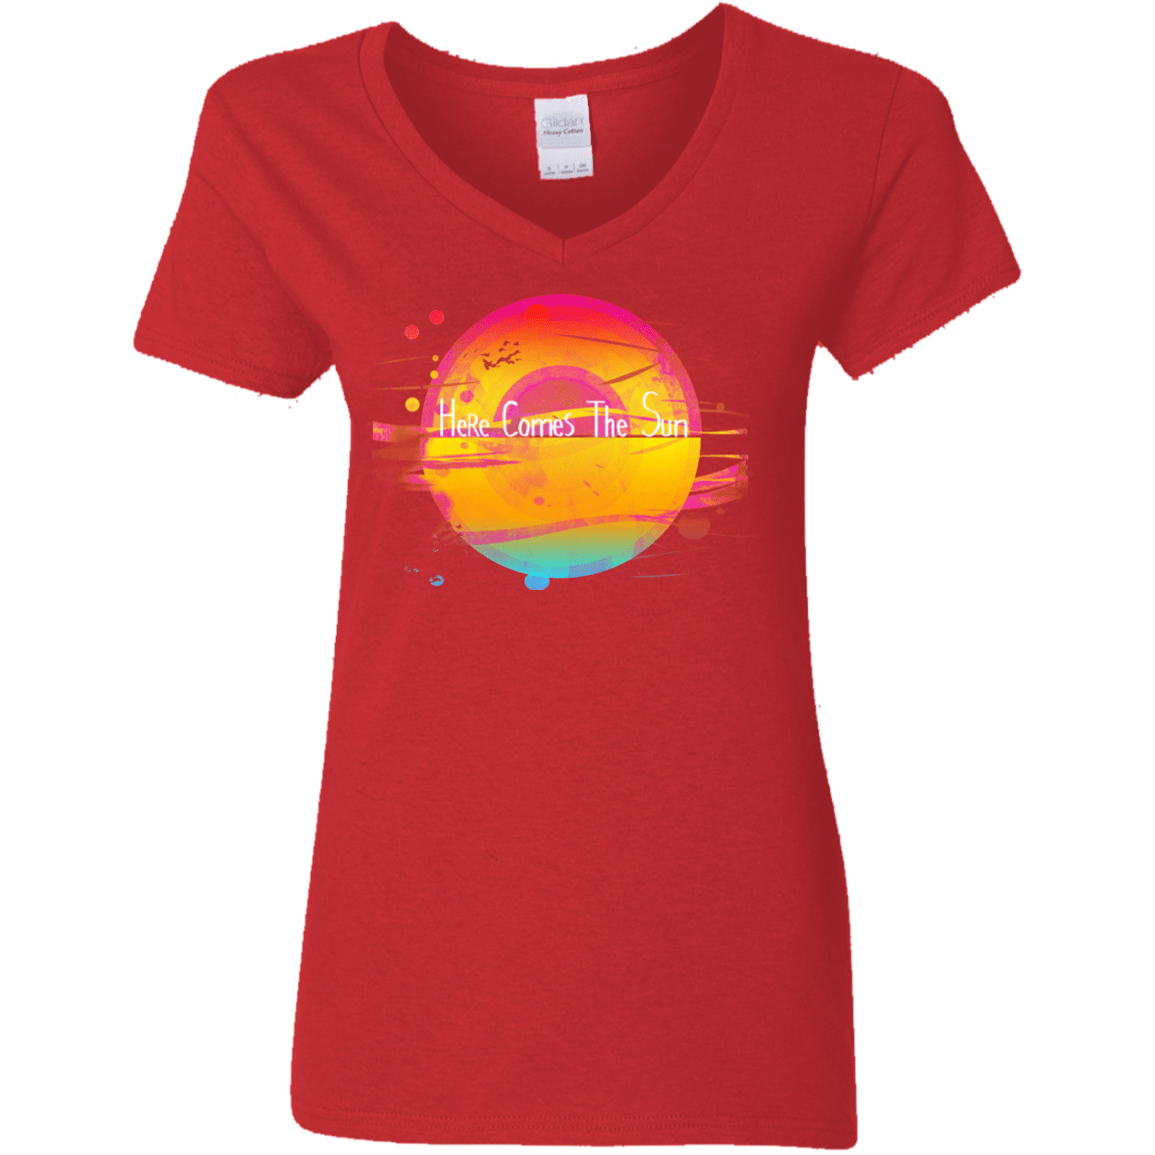 T-Shirts Red / S Here Comes The Sun (2) Women's V-Neck T-Shirt